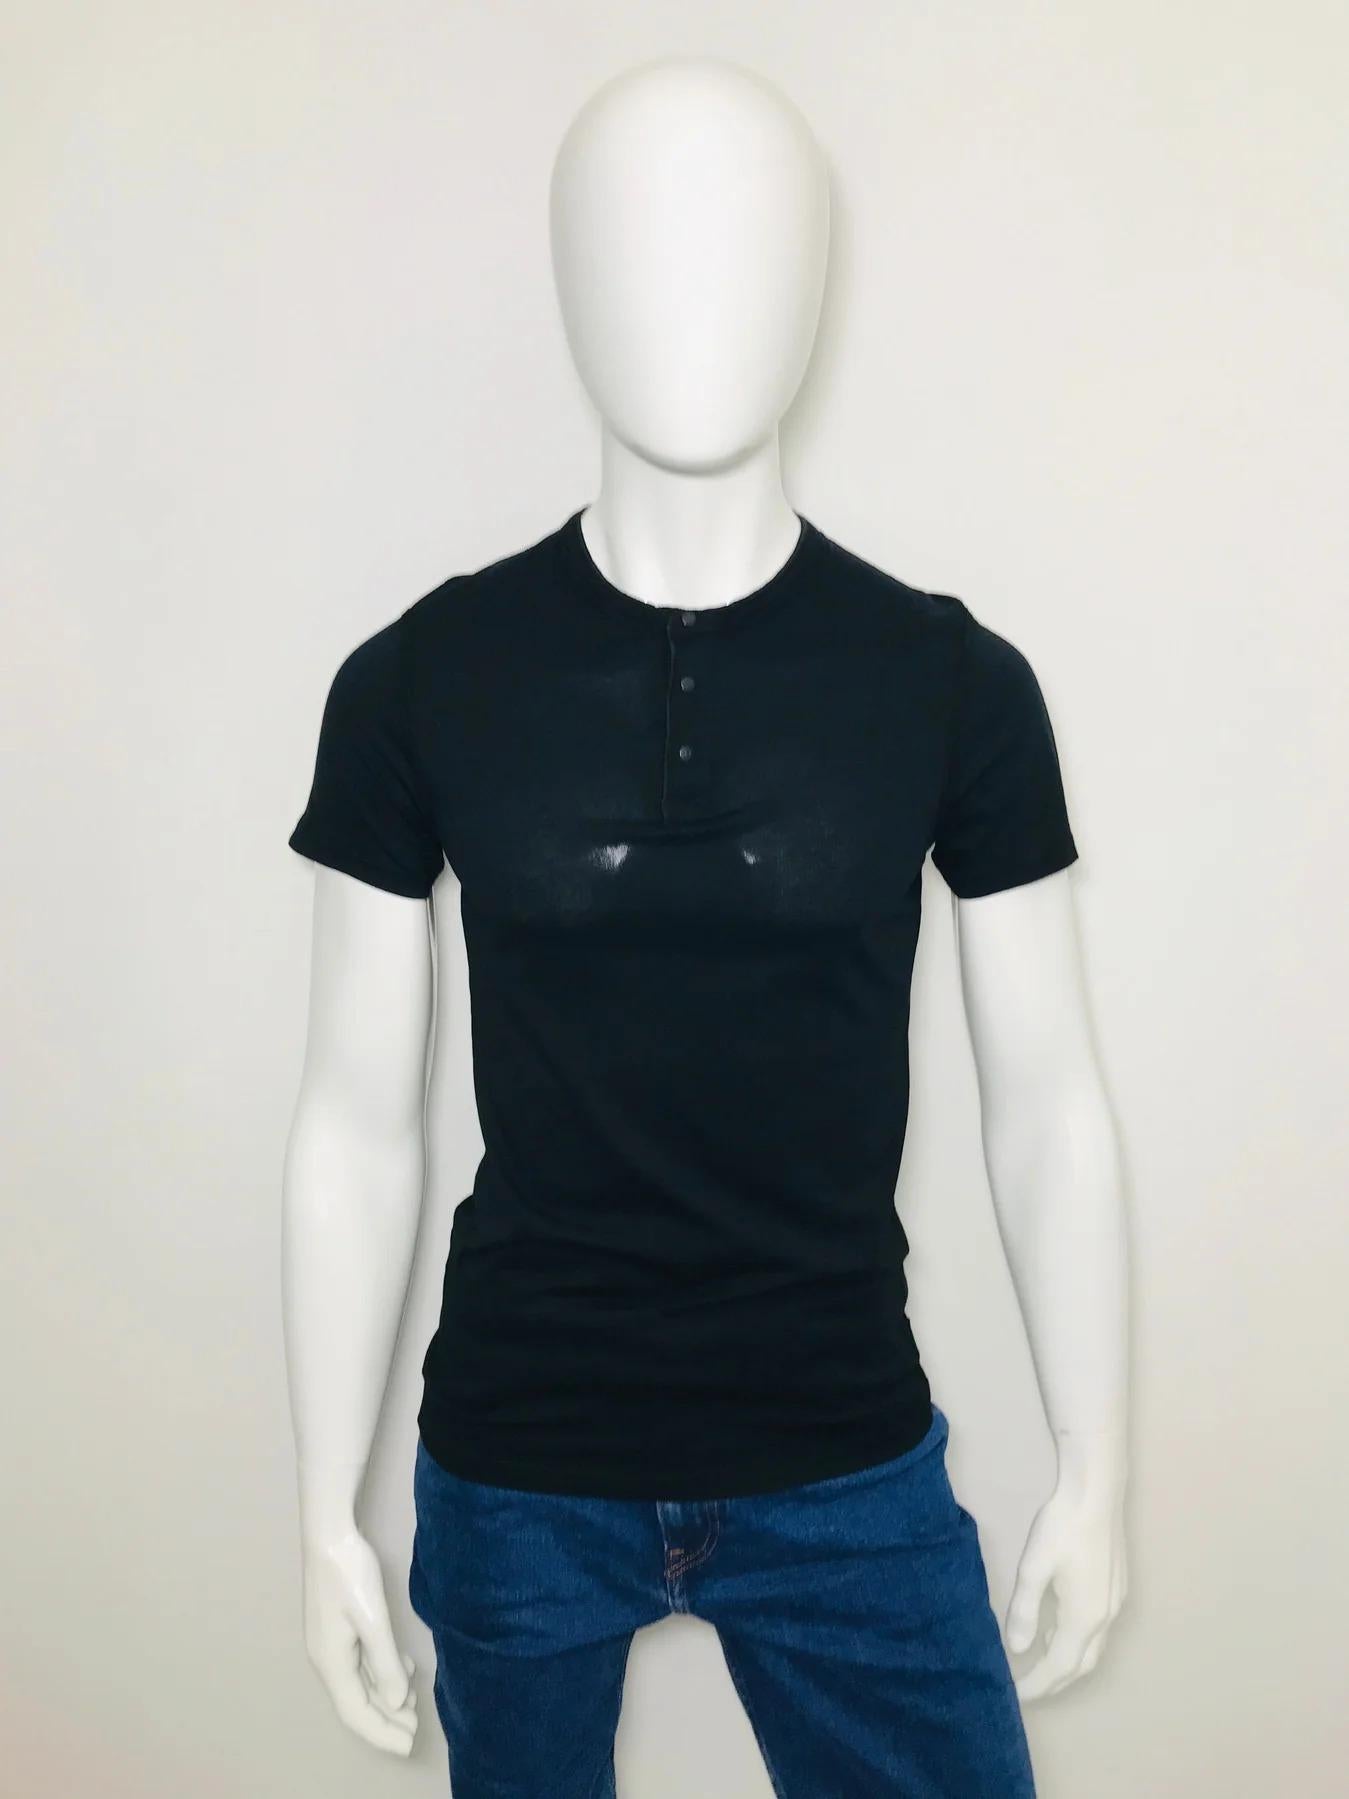 Reigning Champ Ss Henley Tee T-Shirt

Brand New - Reigning Champ SS Henley Tee T-Shirt

Crafted from cotton in black.
Snap button closure, short sleeves.
Crew neckline, slim fit.

Size - XS
Condition - Brand New (With labels)
Composition - Cotton 